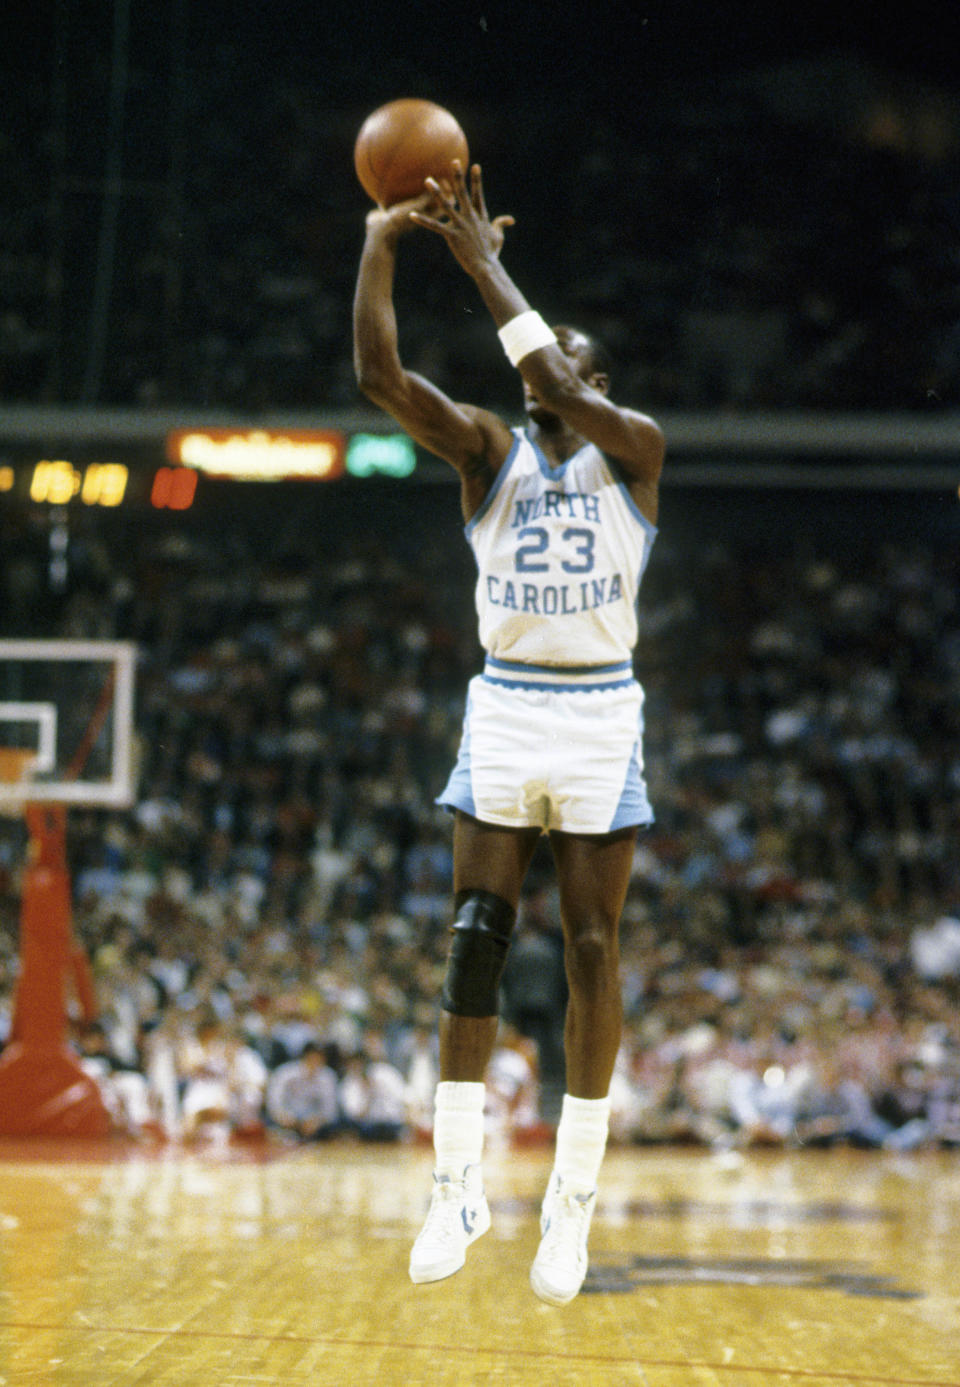 North Carolina guard Michael Jordan (23) in action during the 1983 NCAA Men’s Basketball Tournament. Malcolm Emmons-USA TODAY Sports